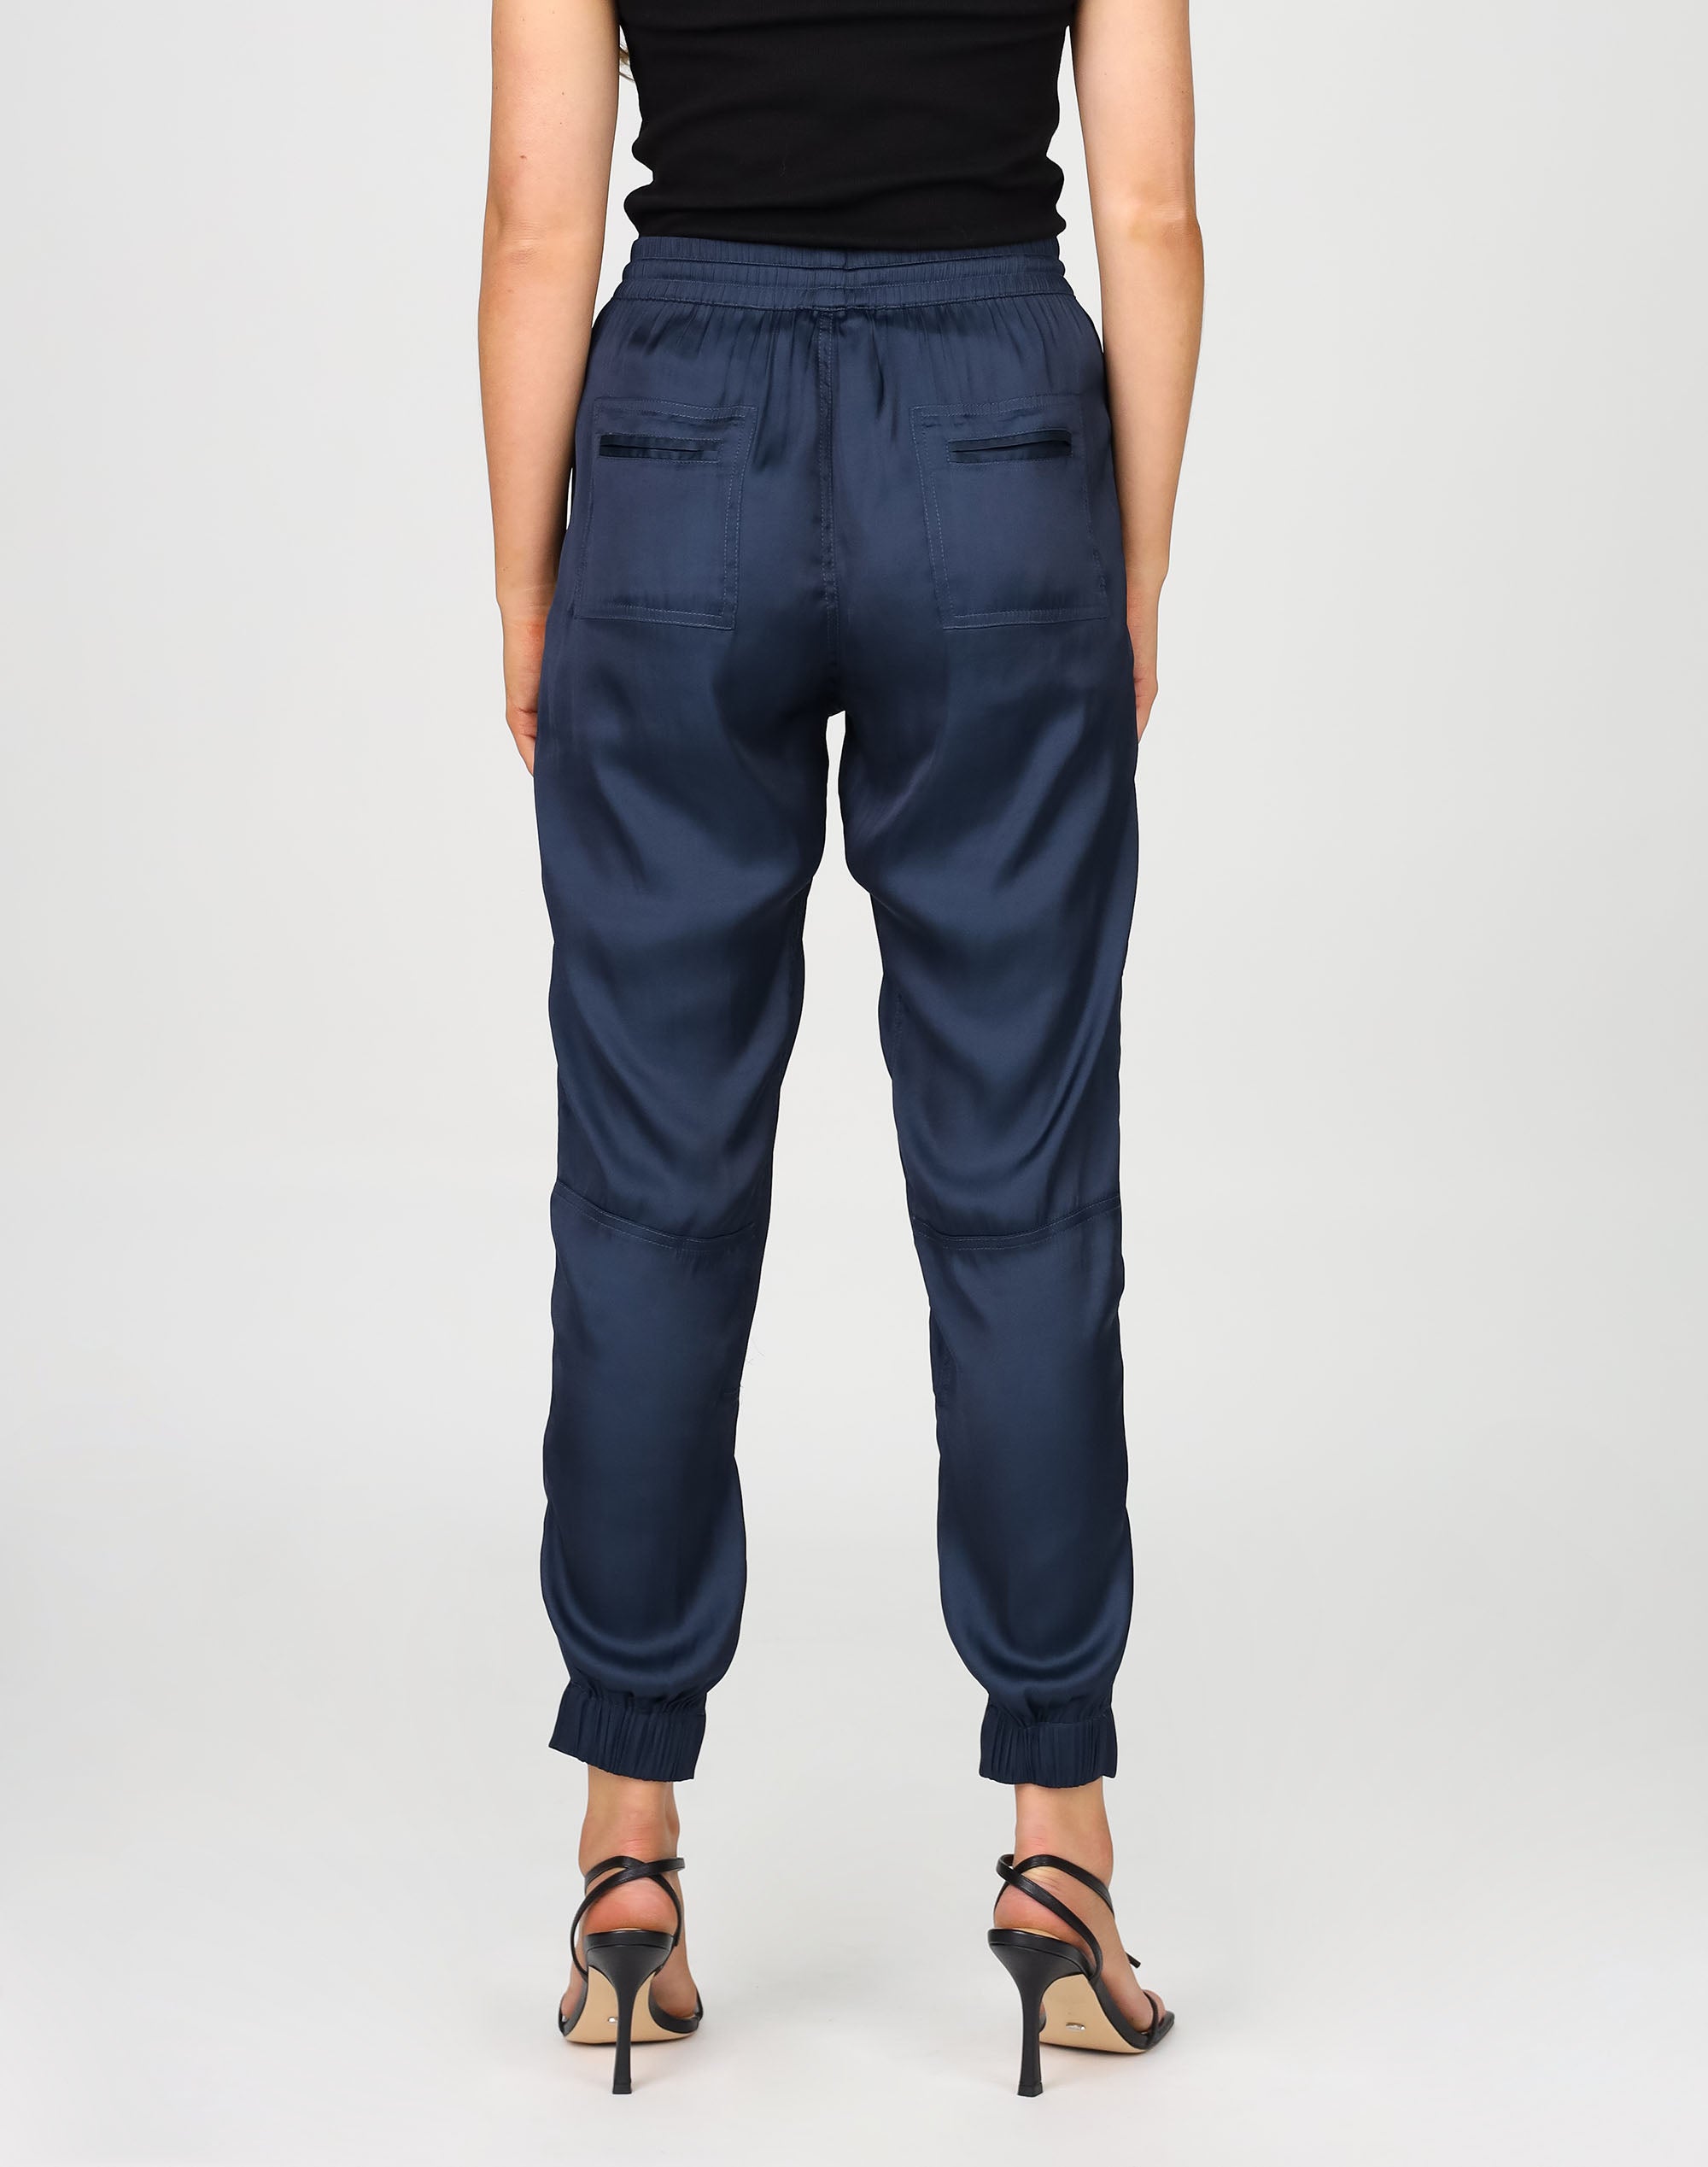 Topshop Petite slouch trouser in navy  ASOS